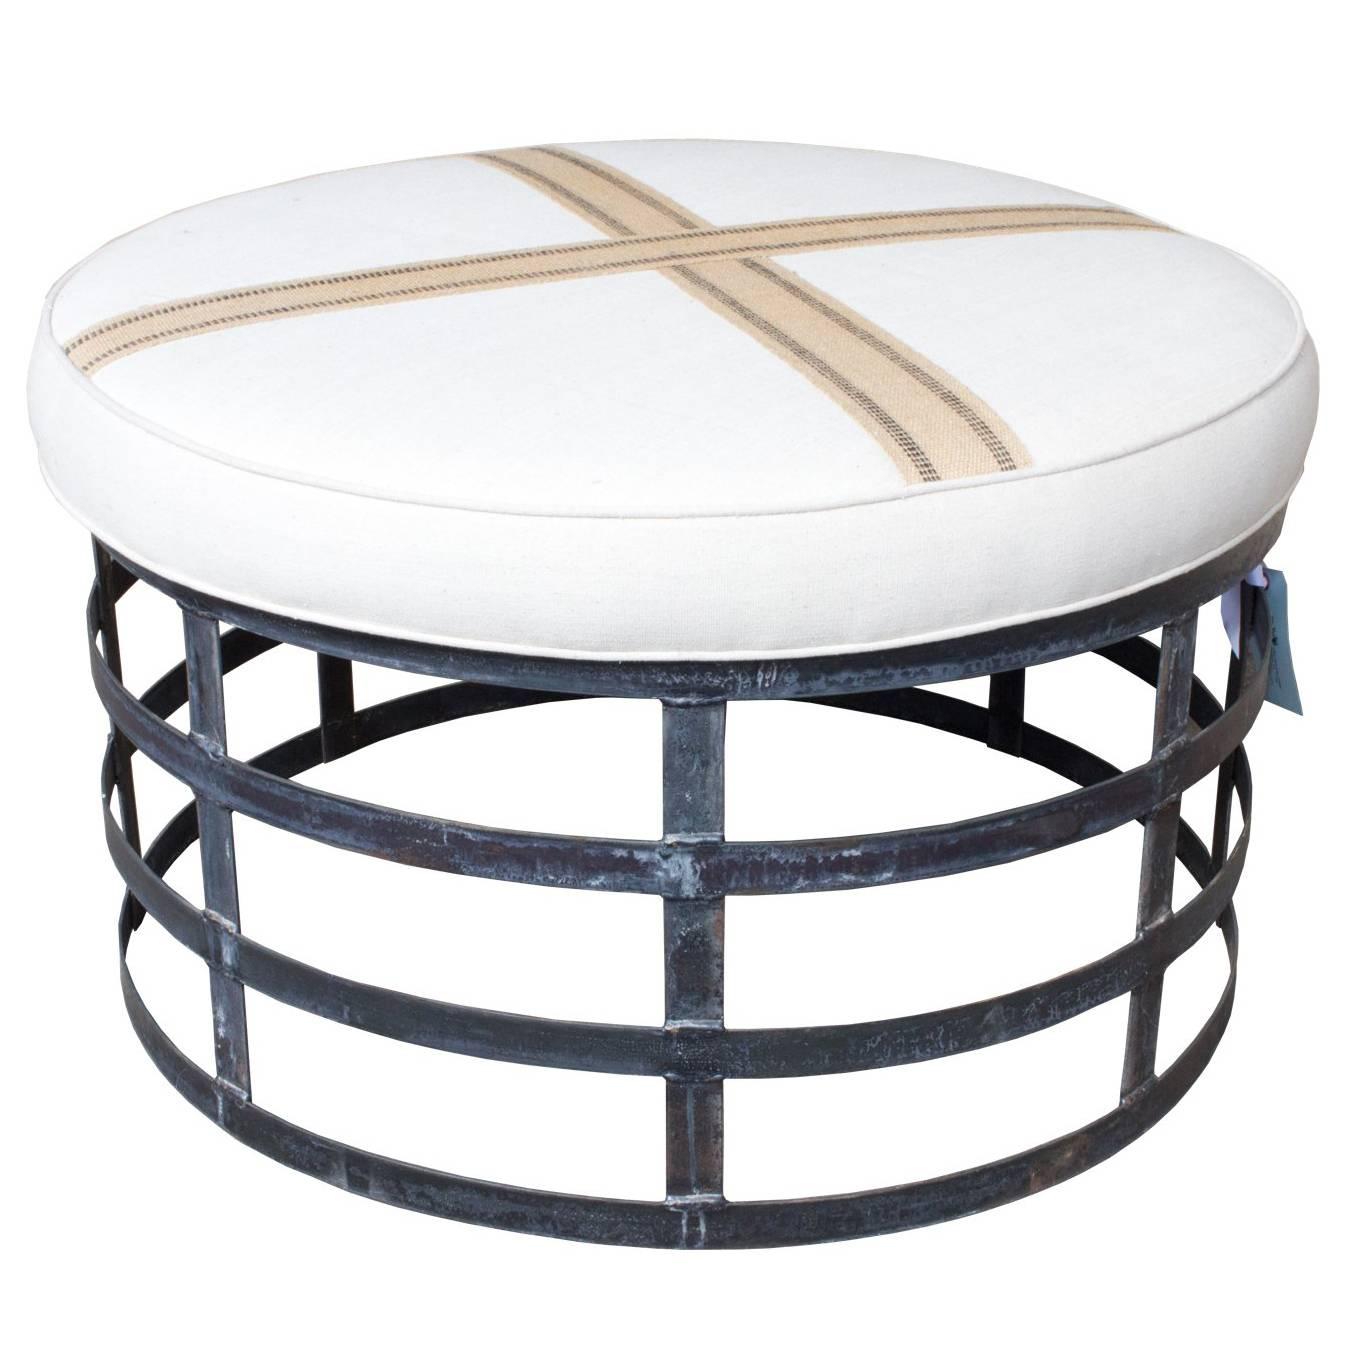 Oversized Round Industrial Style Ottoman with Cotton Linen Upholstery